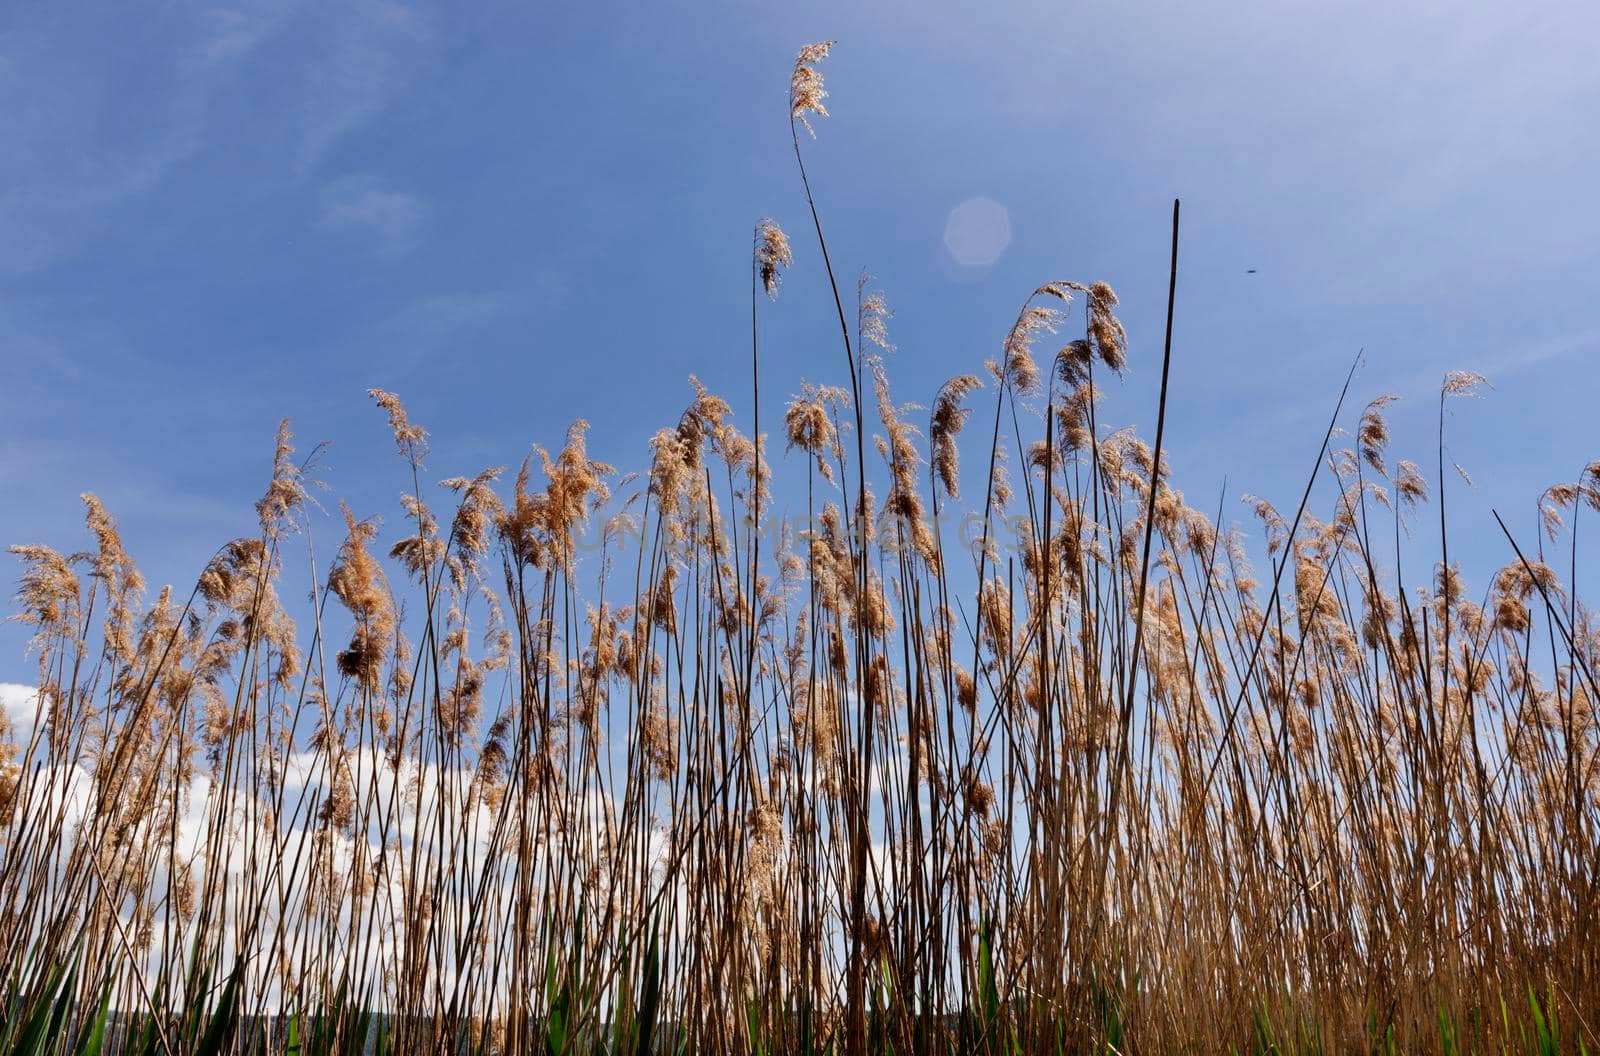 Long stems of common reeds with spikelets against blue sky, aquatic plant